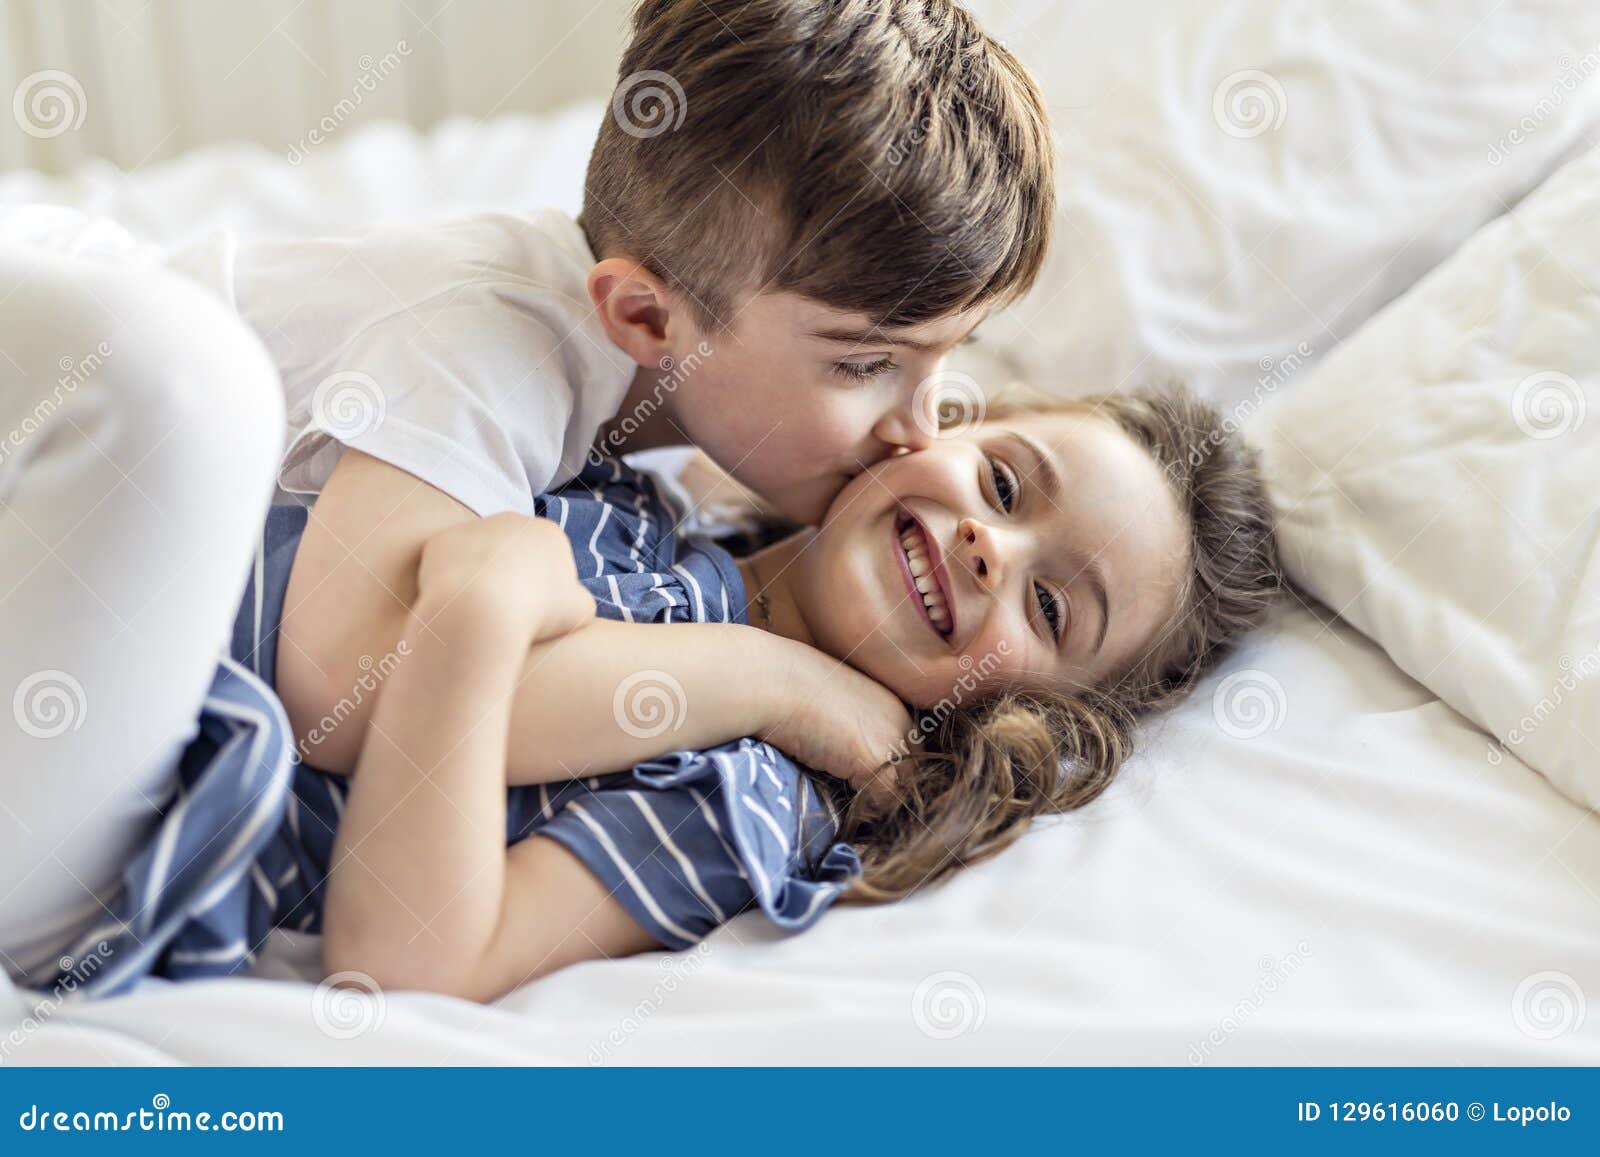 Brother and Sister Having Fun Together on Bed Stock Photo - Image ...